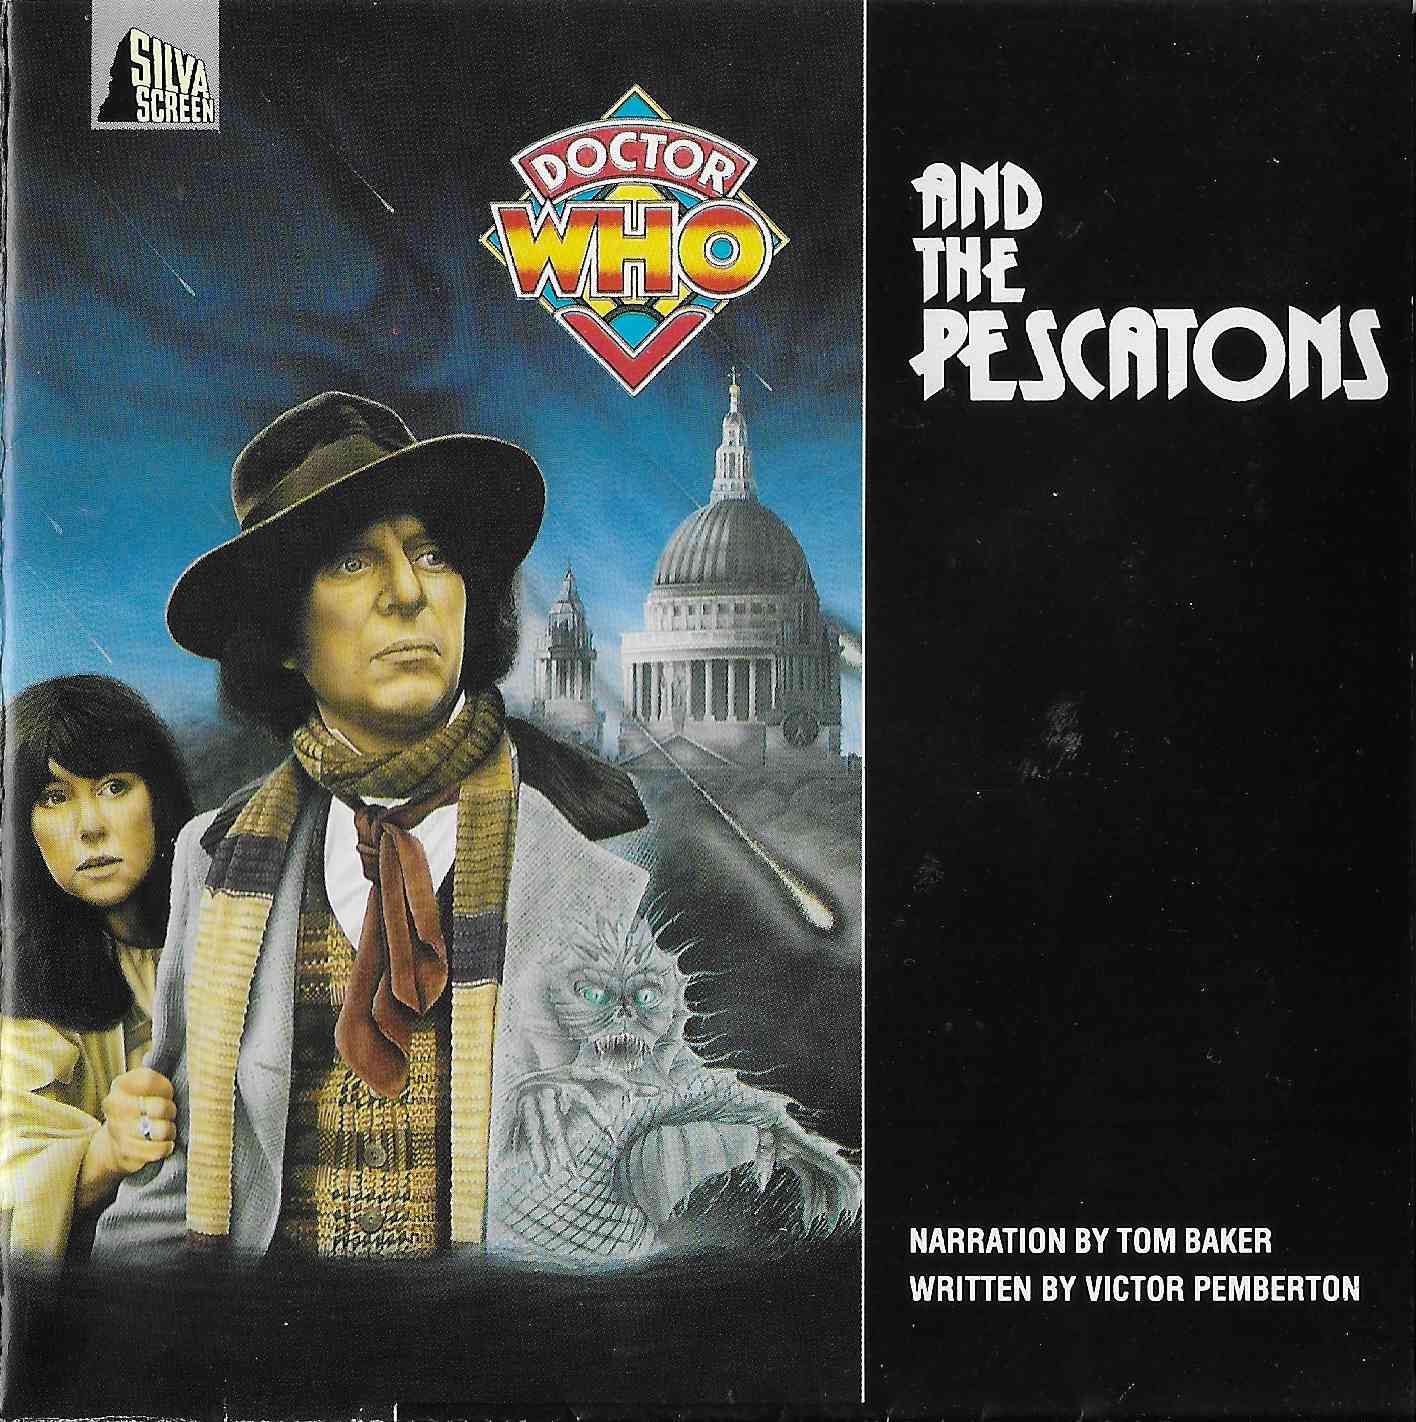 Picture of Doctor Who and the Pescatons by artist Victor Pemberton from the BBC cds - Records and Tapes library